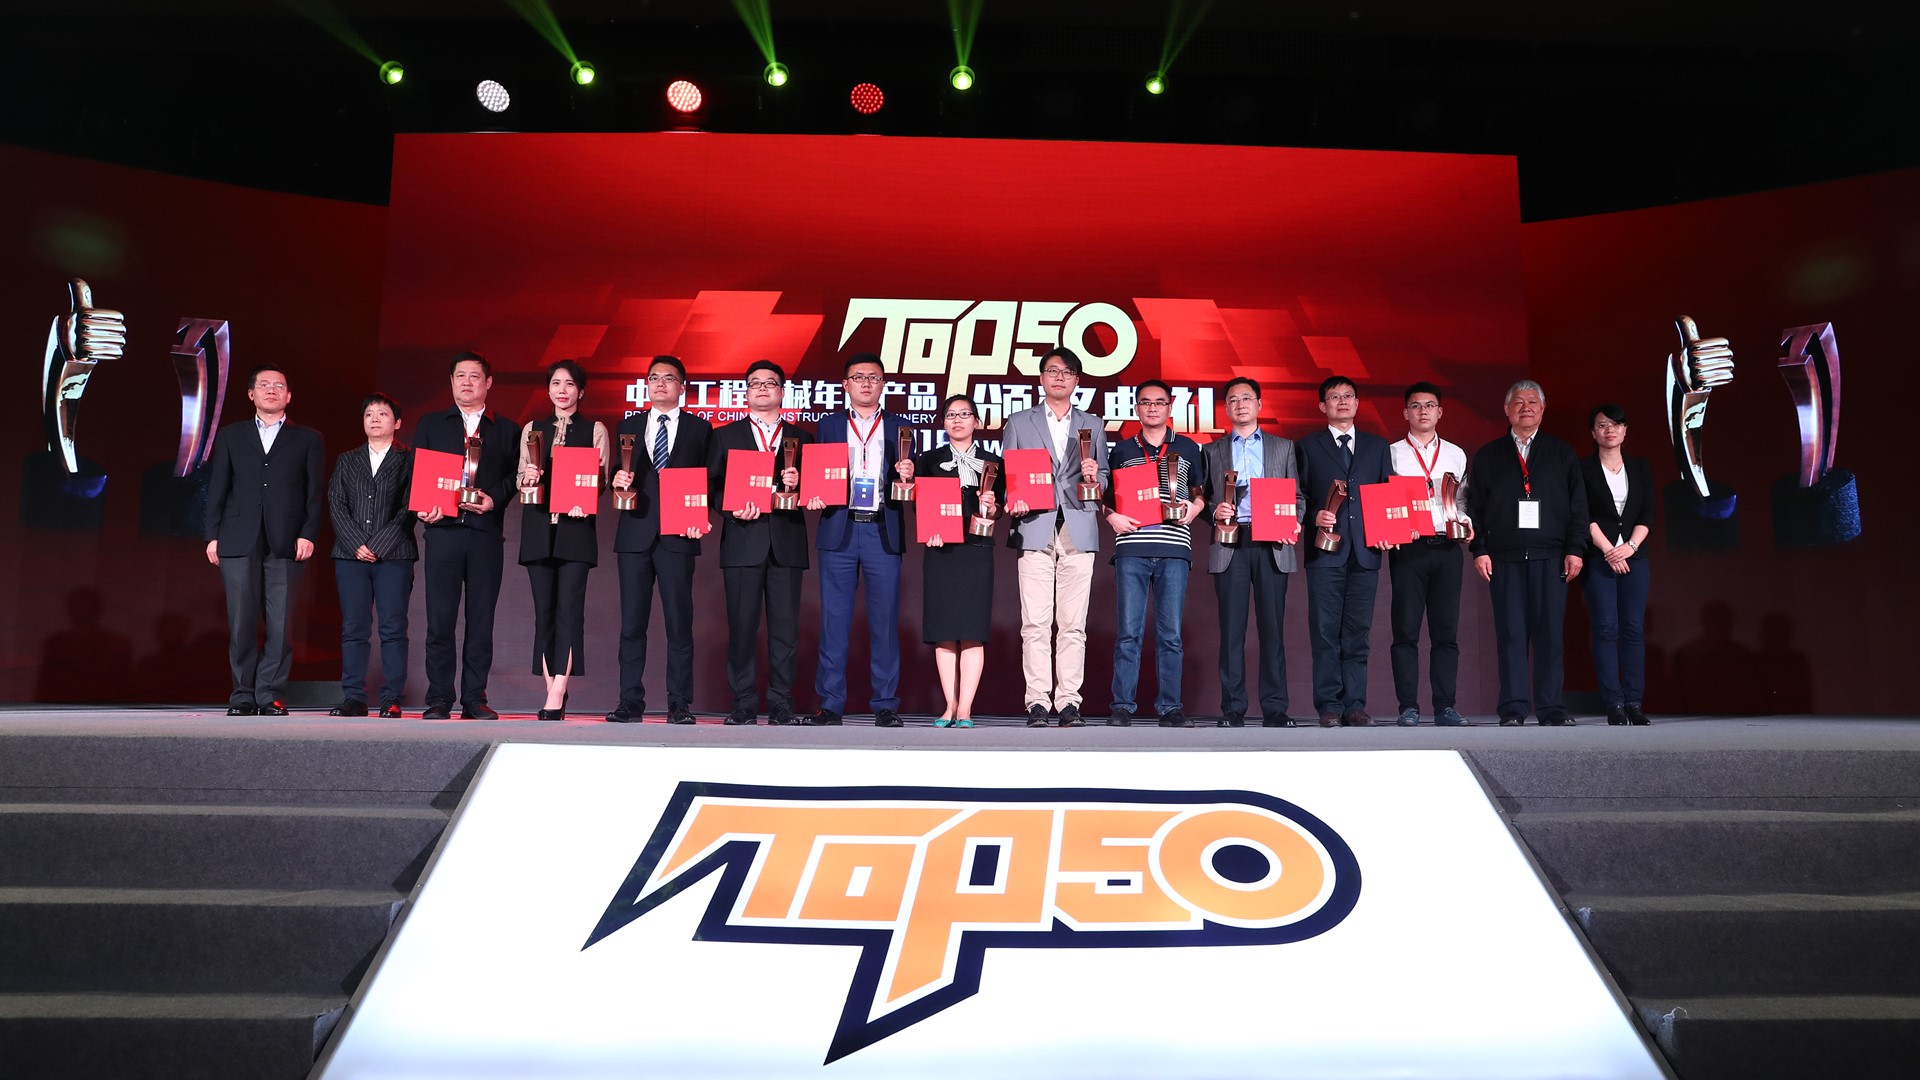 The brand received the honors at an awards ceremony held in Beijing